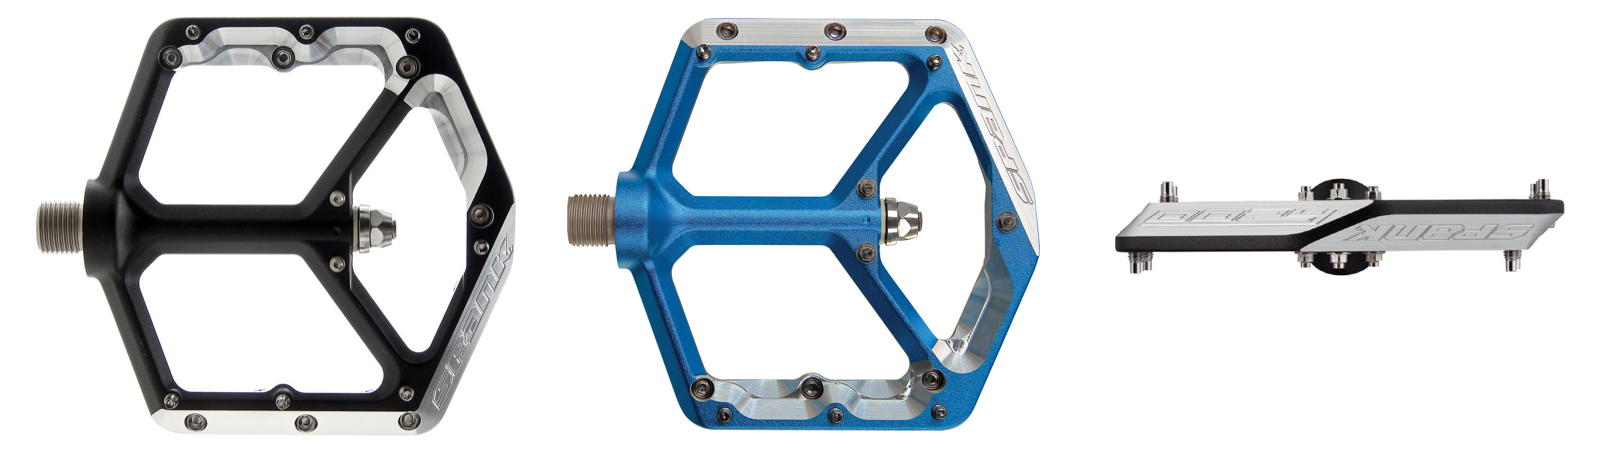 MTB Flat Pedal Buyer's Guide - Worldwide Cyclery